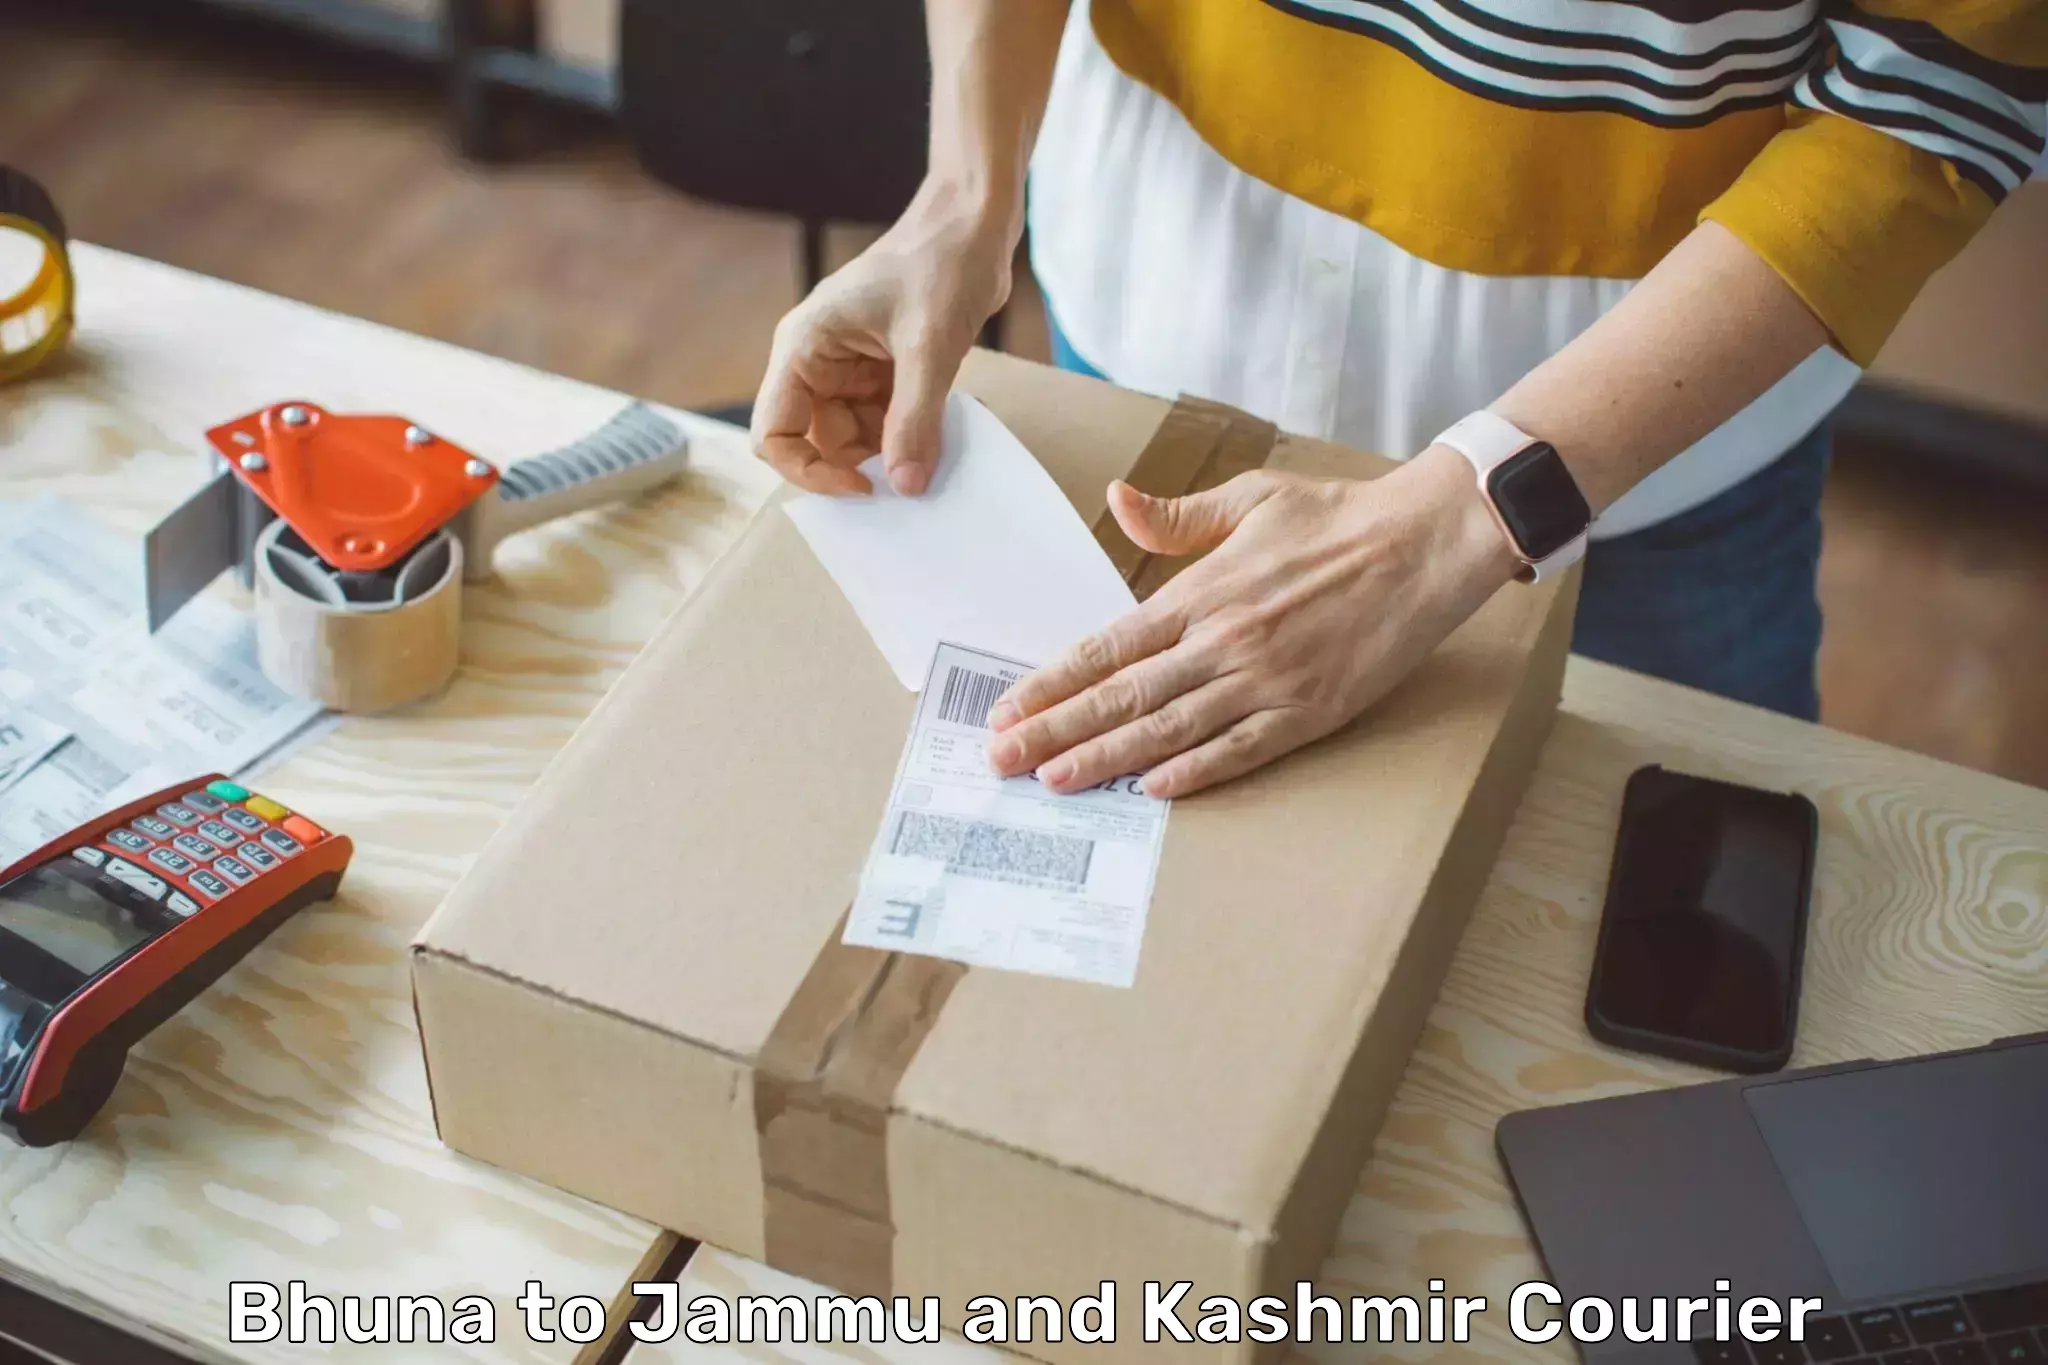 On-call courier service Bhuna to Jammu and Kashmir